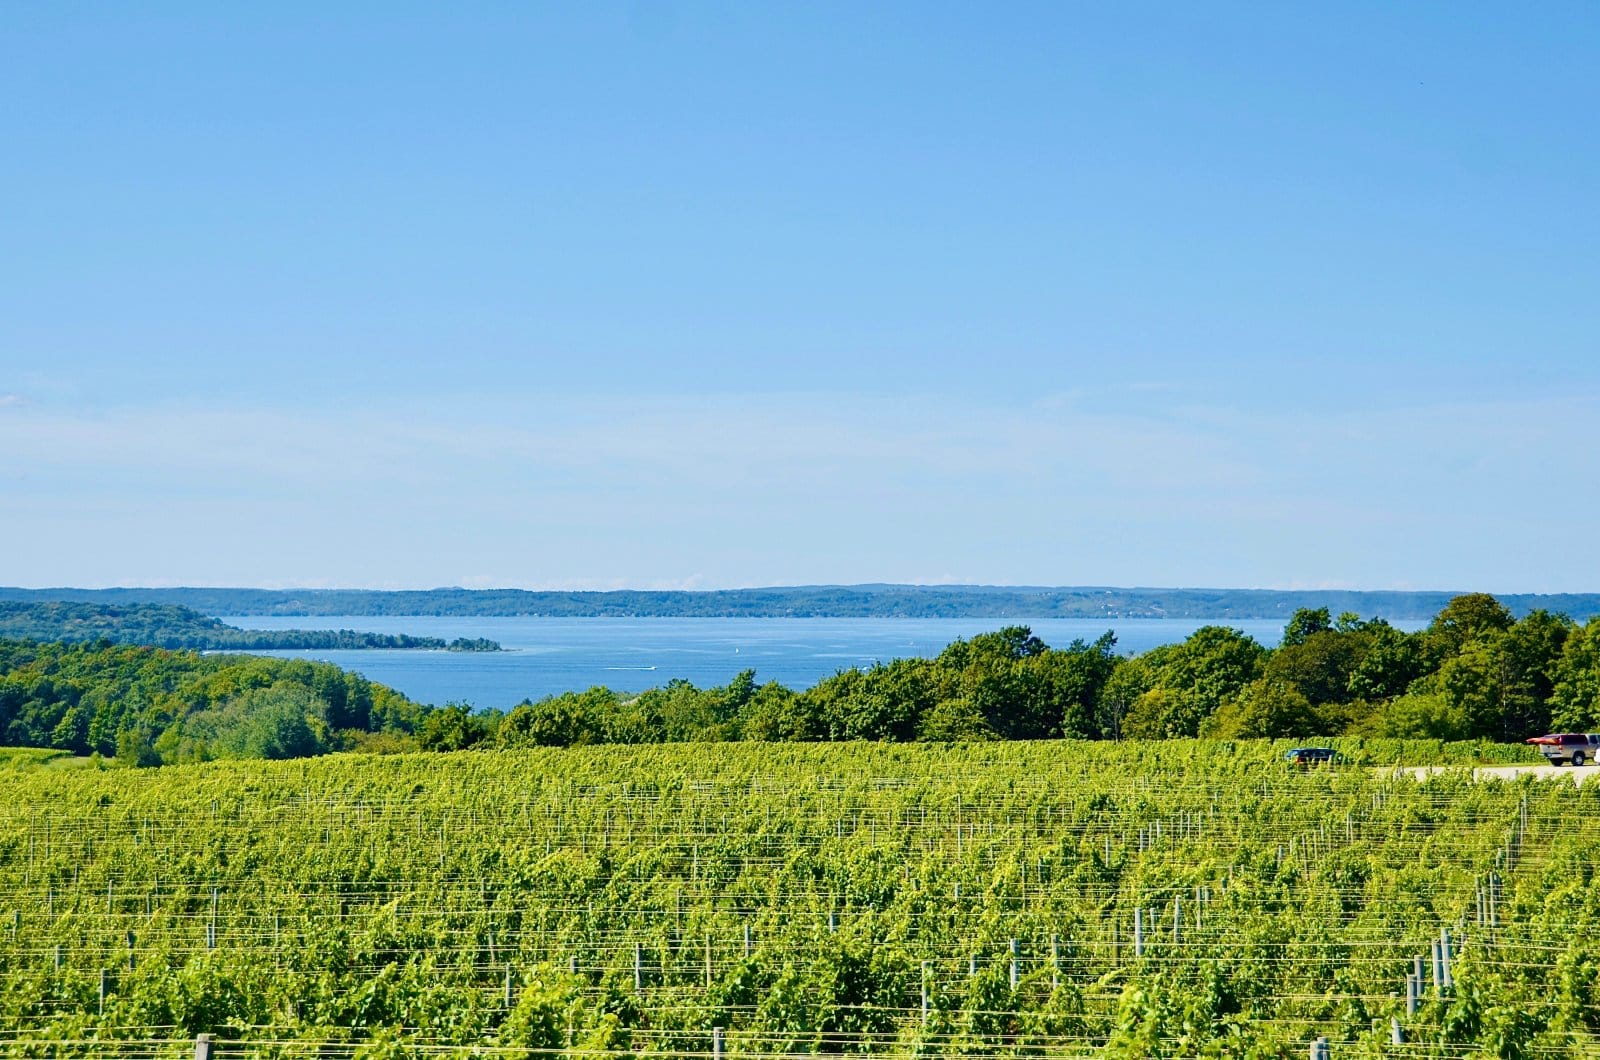 <p class="wp-caption-text">Image Credit: Shutterstock / PQK</p>  <p><span>Michigan’s wine trails along Lake Michigan’s coast surprise with their quality Rieslings, sparkling wines, and ice wines, thriving in the cooler climate.</span></p>